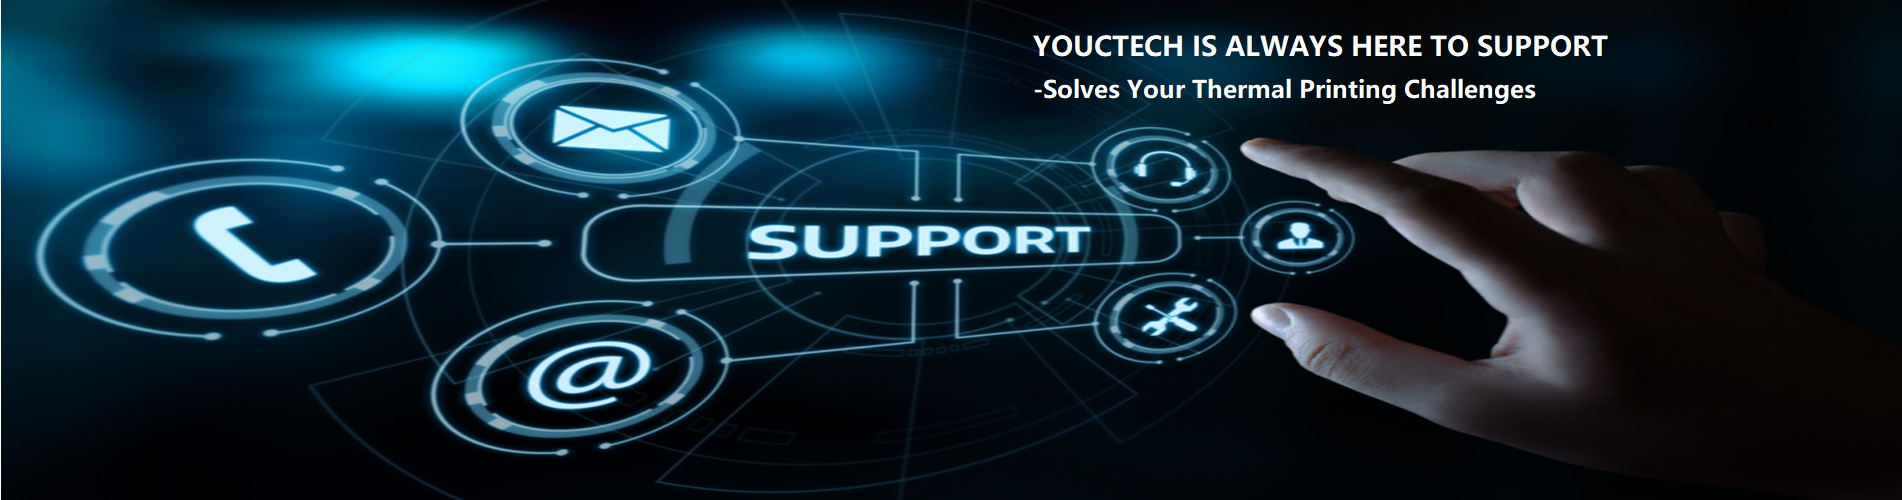 Contact youctech for thermal printer mechanism inquiry